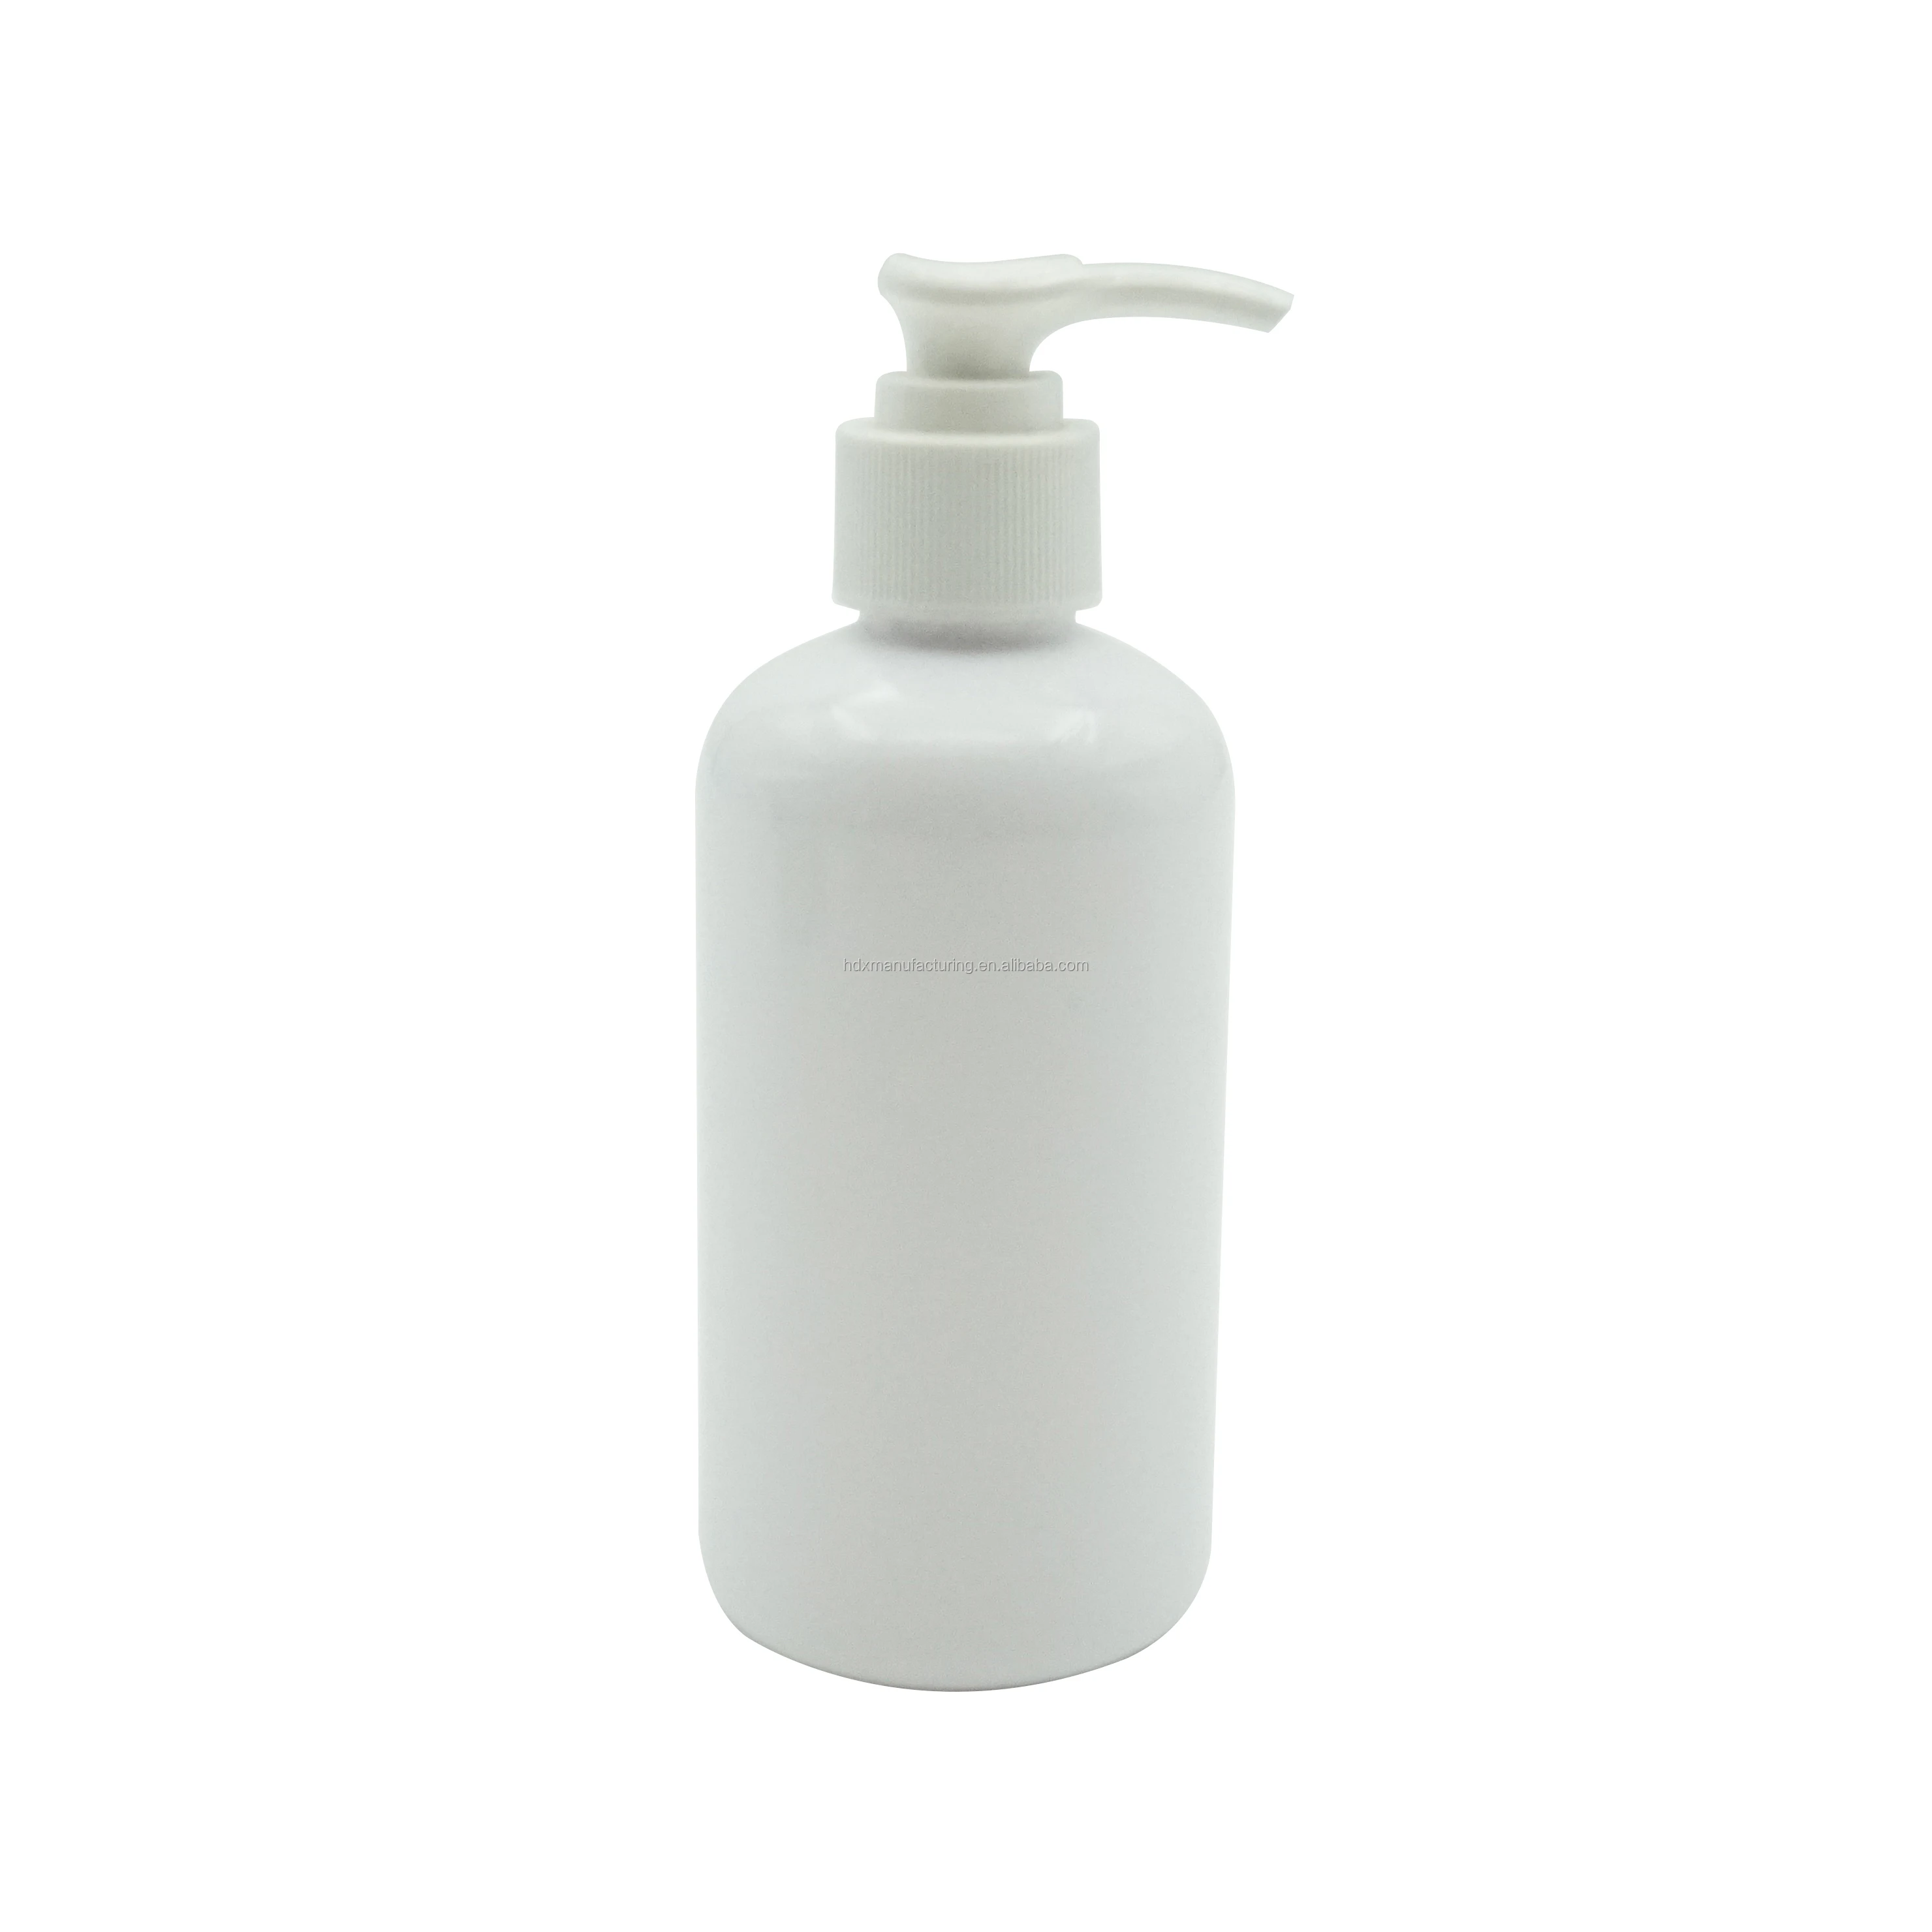 White Shampoo Bottle Haodexin Lotion Bottle With Silver Pump Dispenser ...